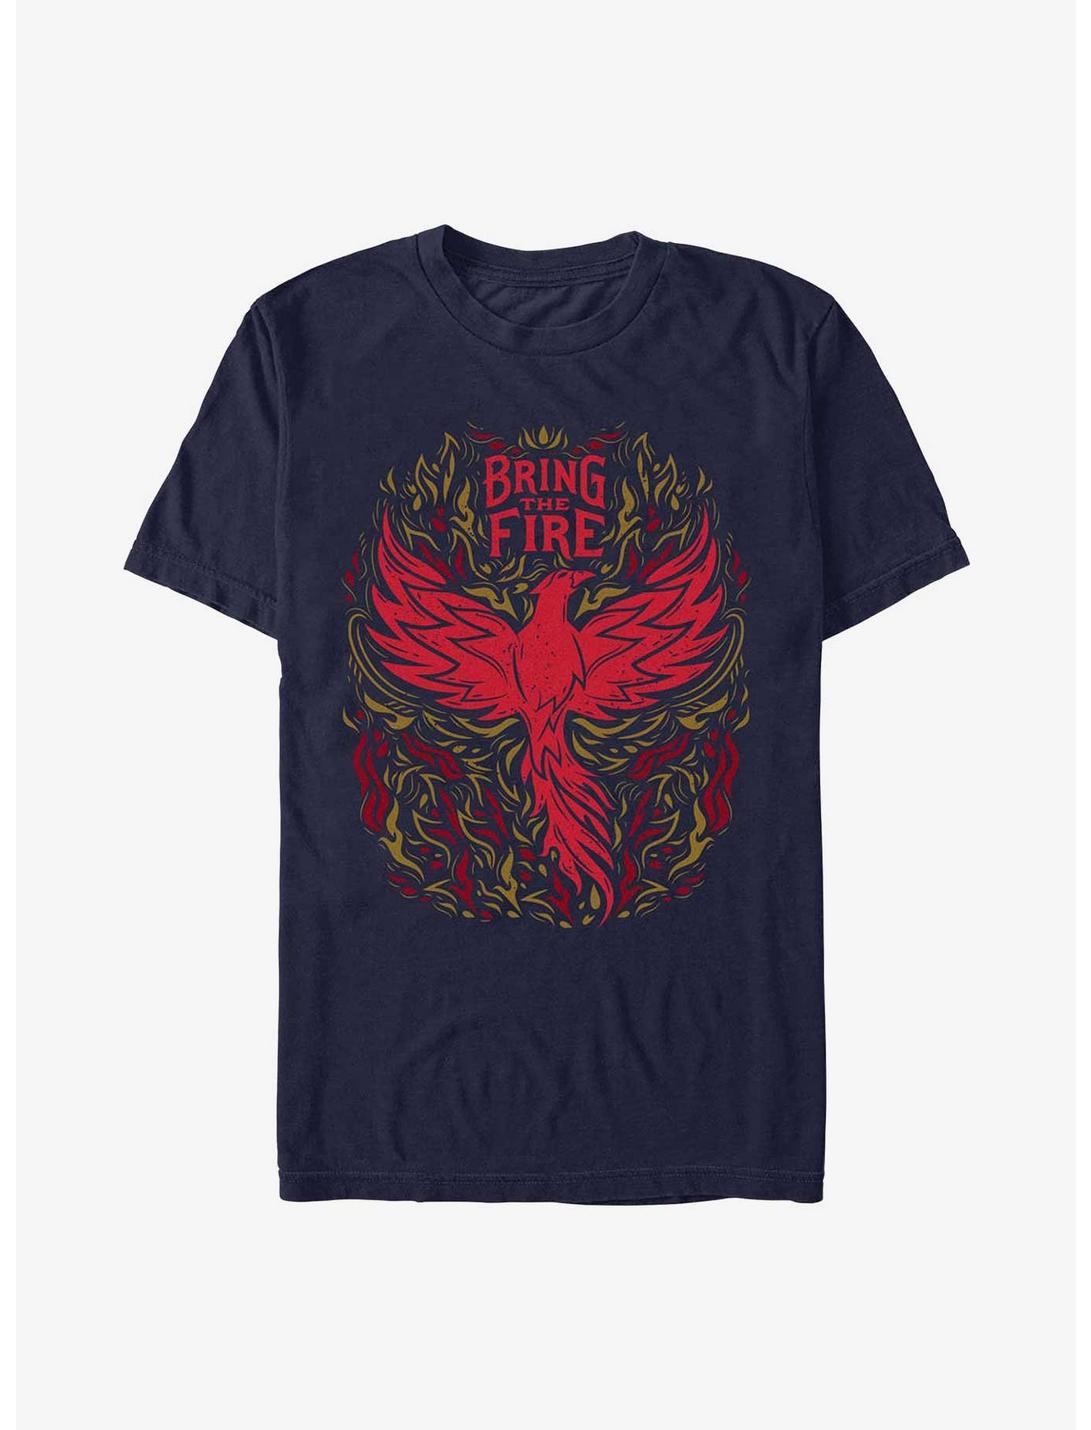 Shadow And Bone Bring The Fire T-Shirt, NAVY, hi-res